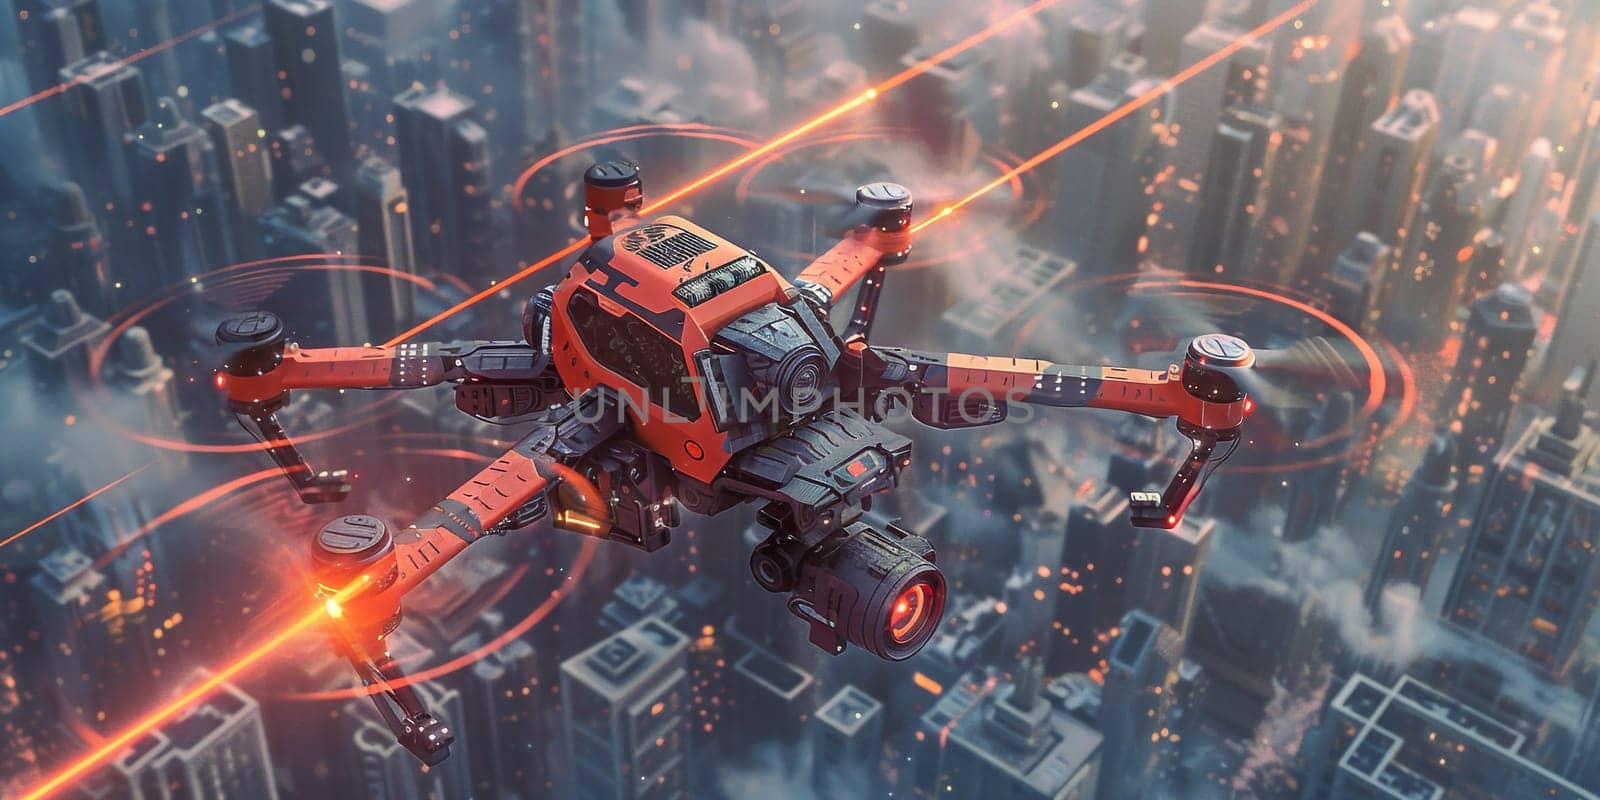 3D Jet plane emitting hot flames and embers over a city. High quality photo